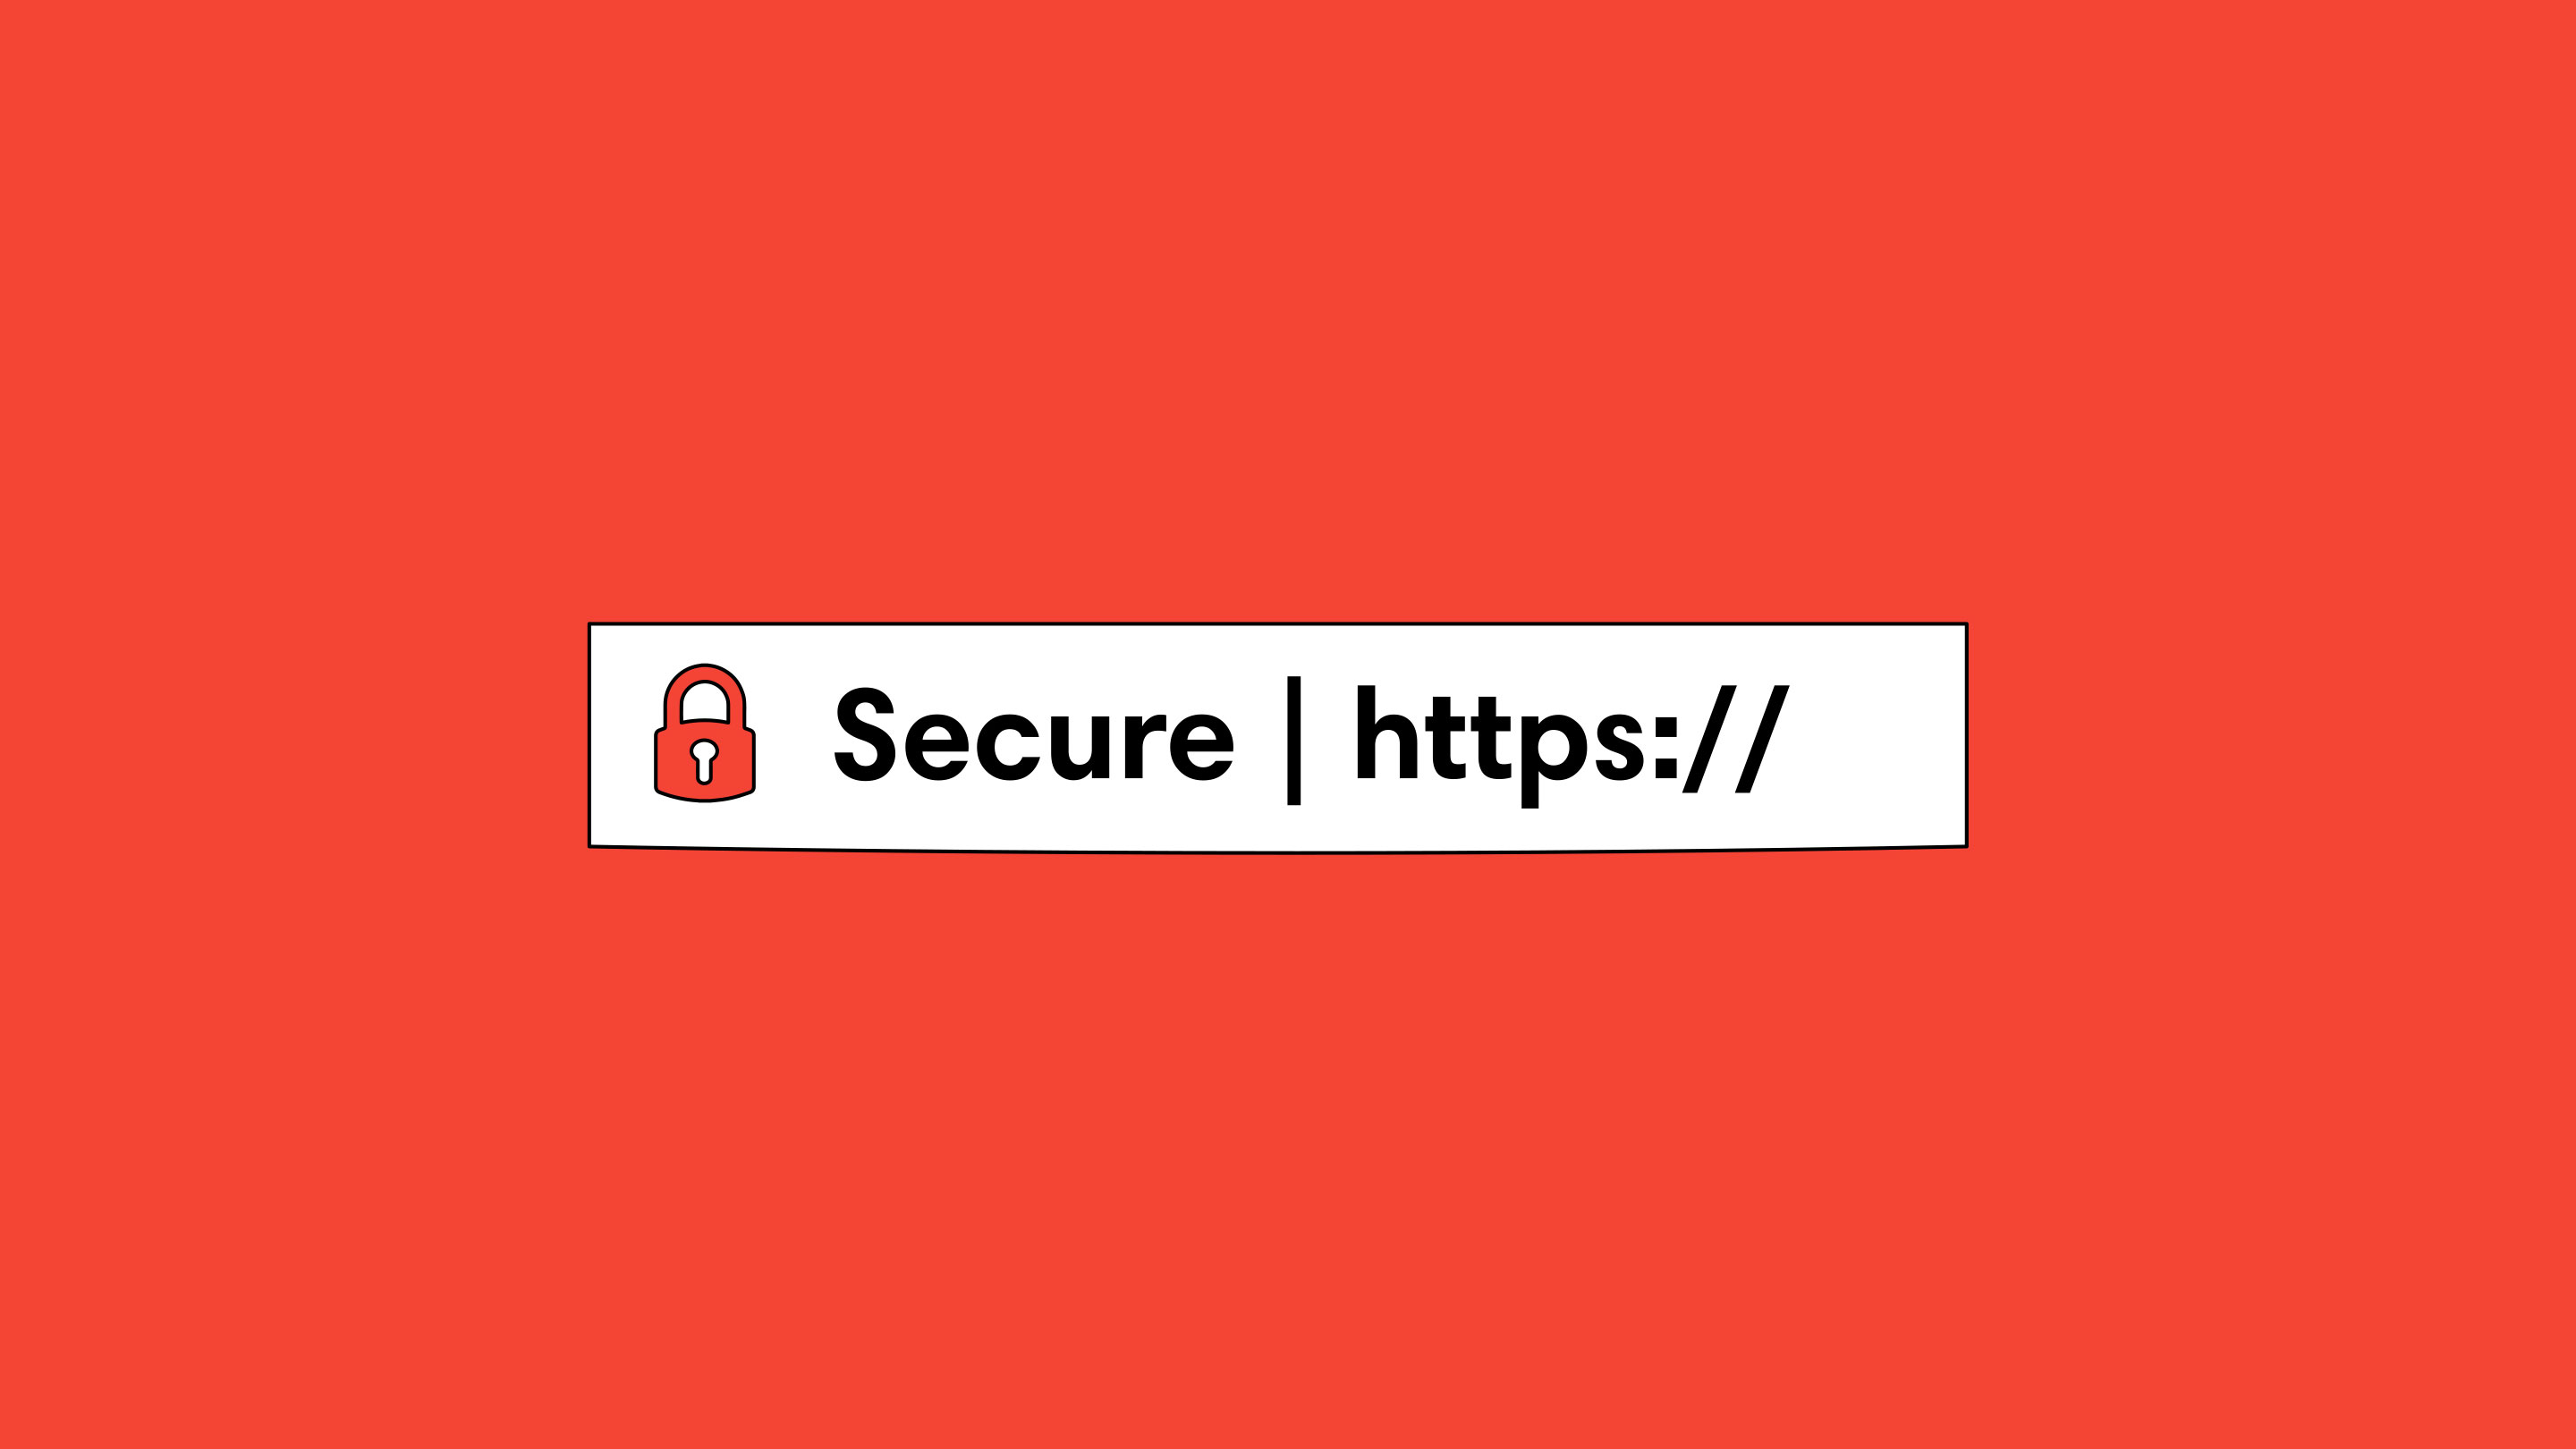 HTTP Or HTTPS? It’s Time to Decide.